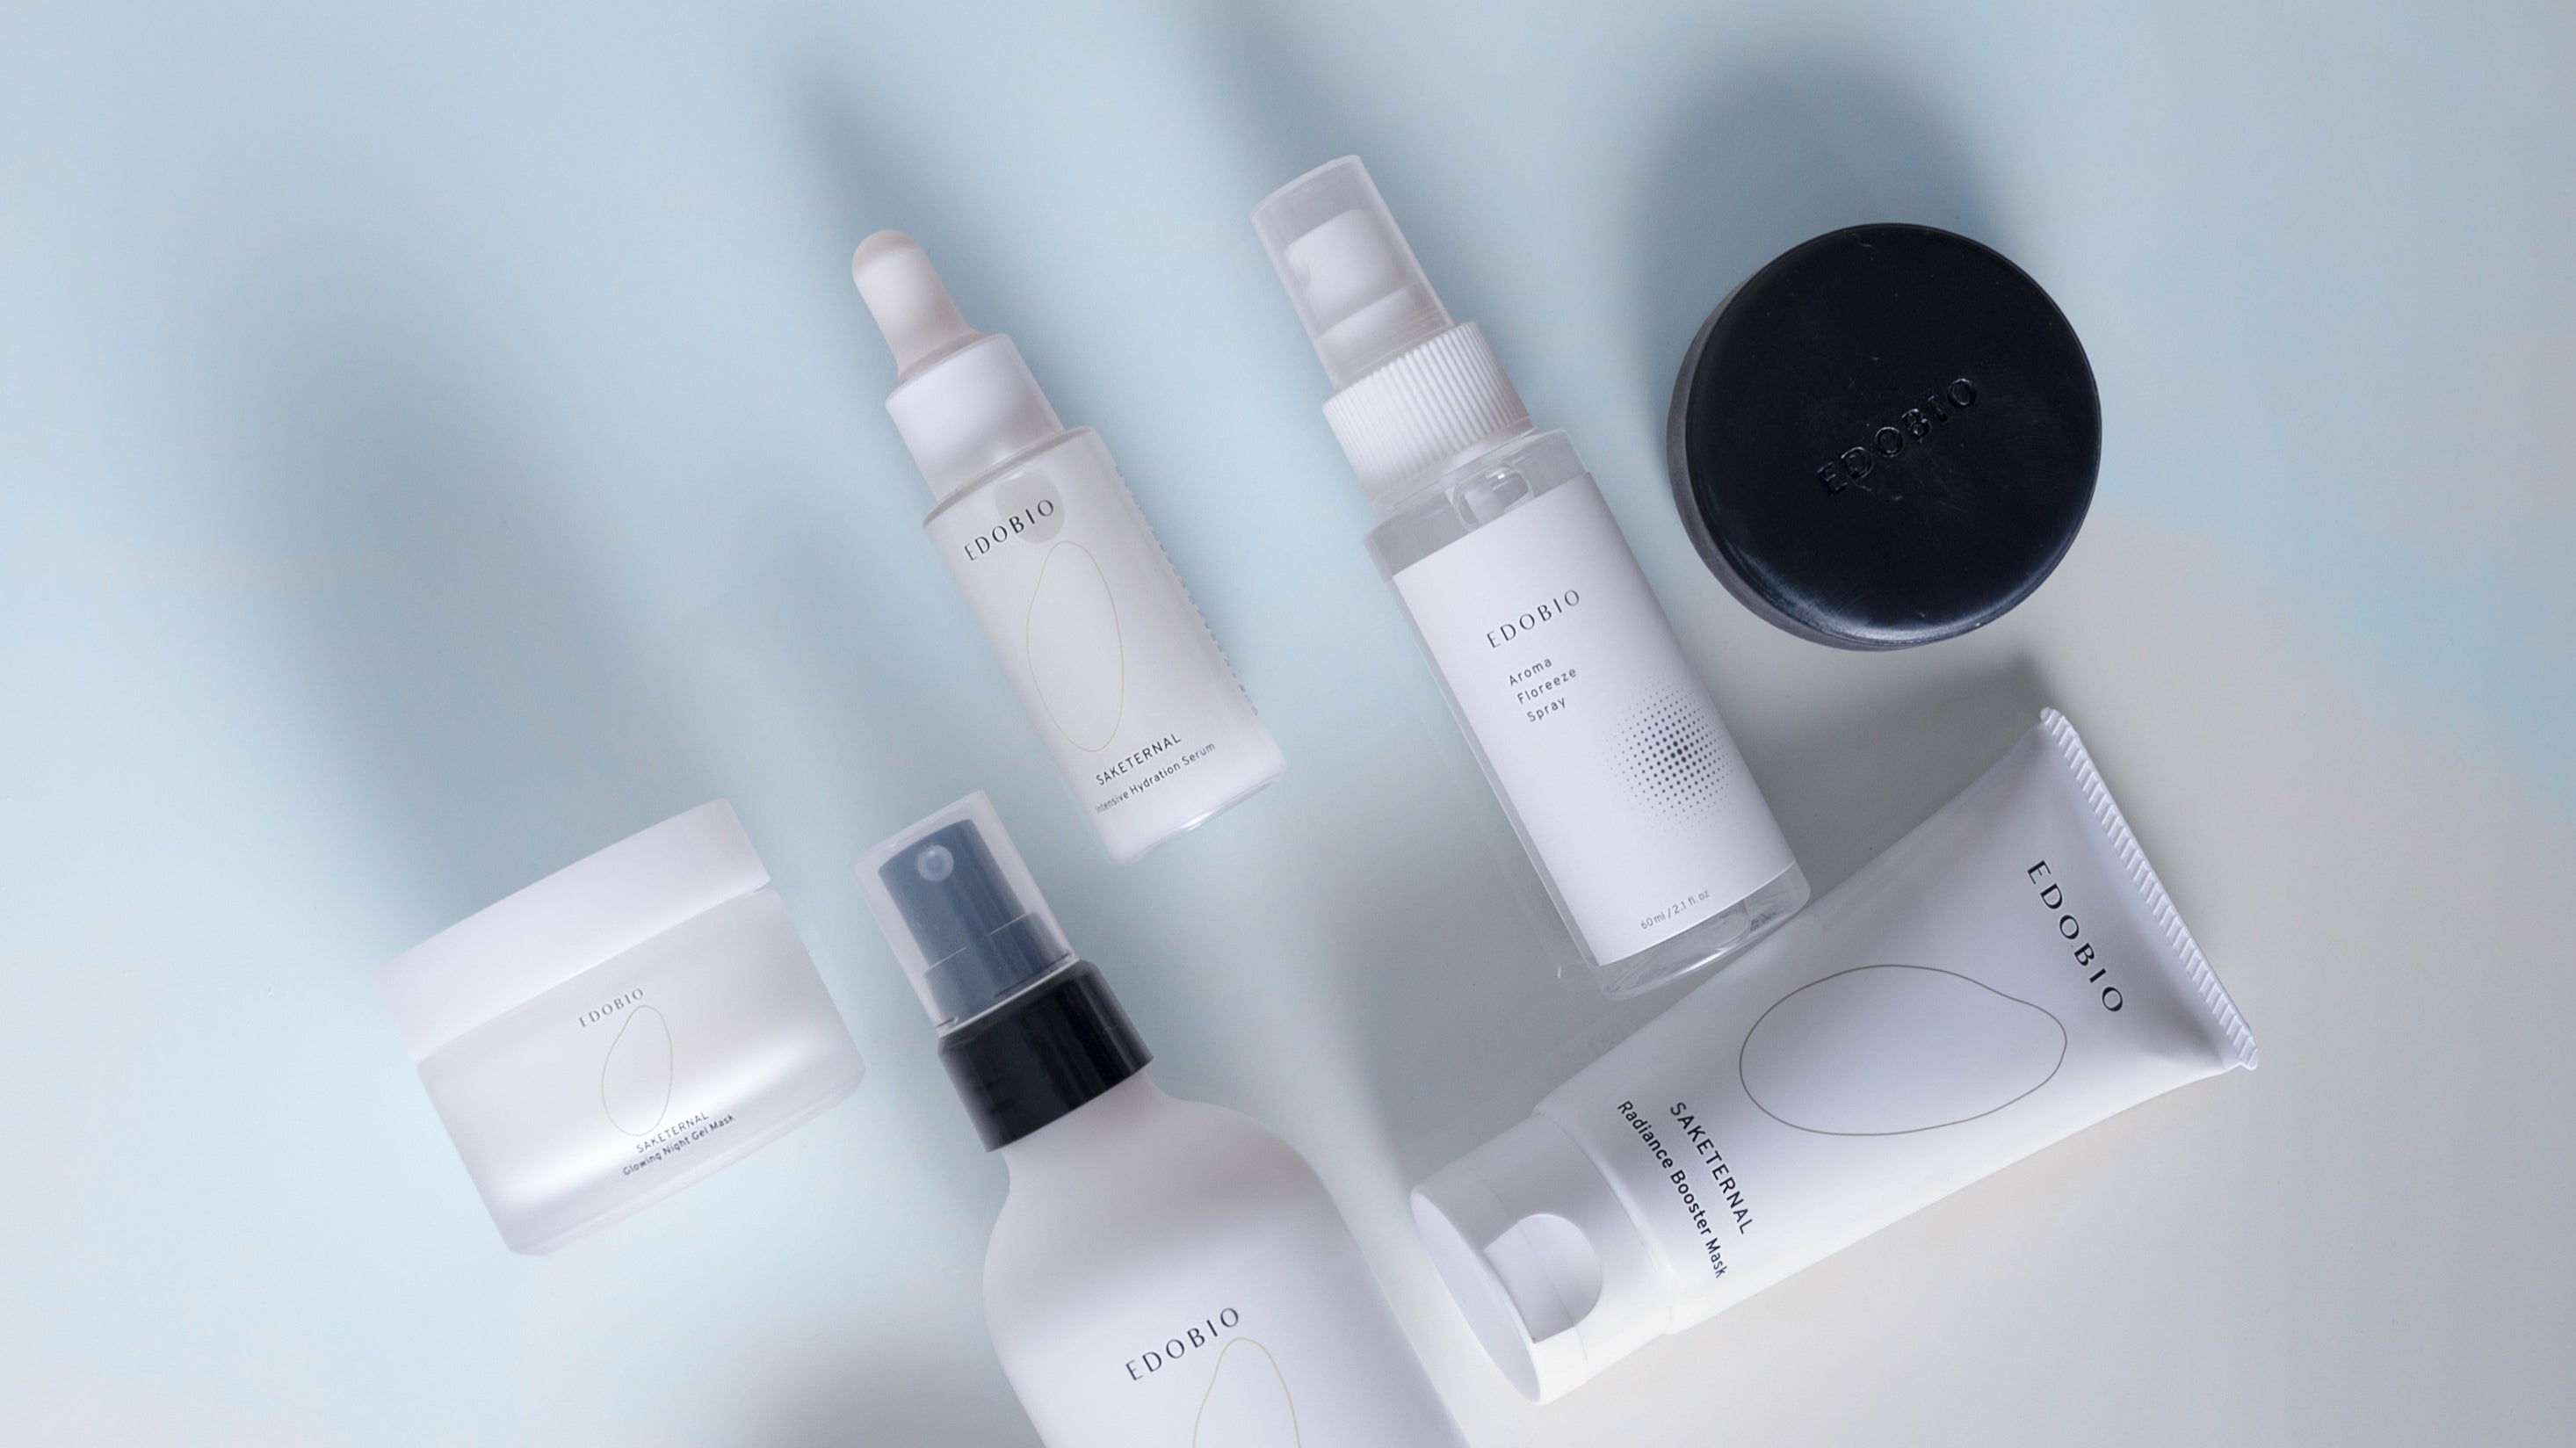 A MINIMALIST APPROACH TO SKINCARE